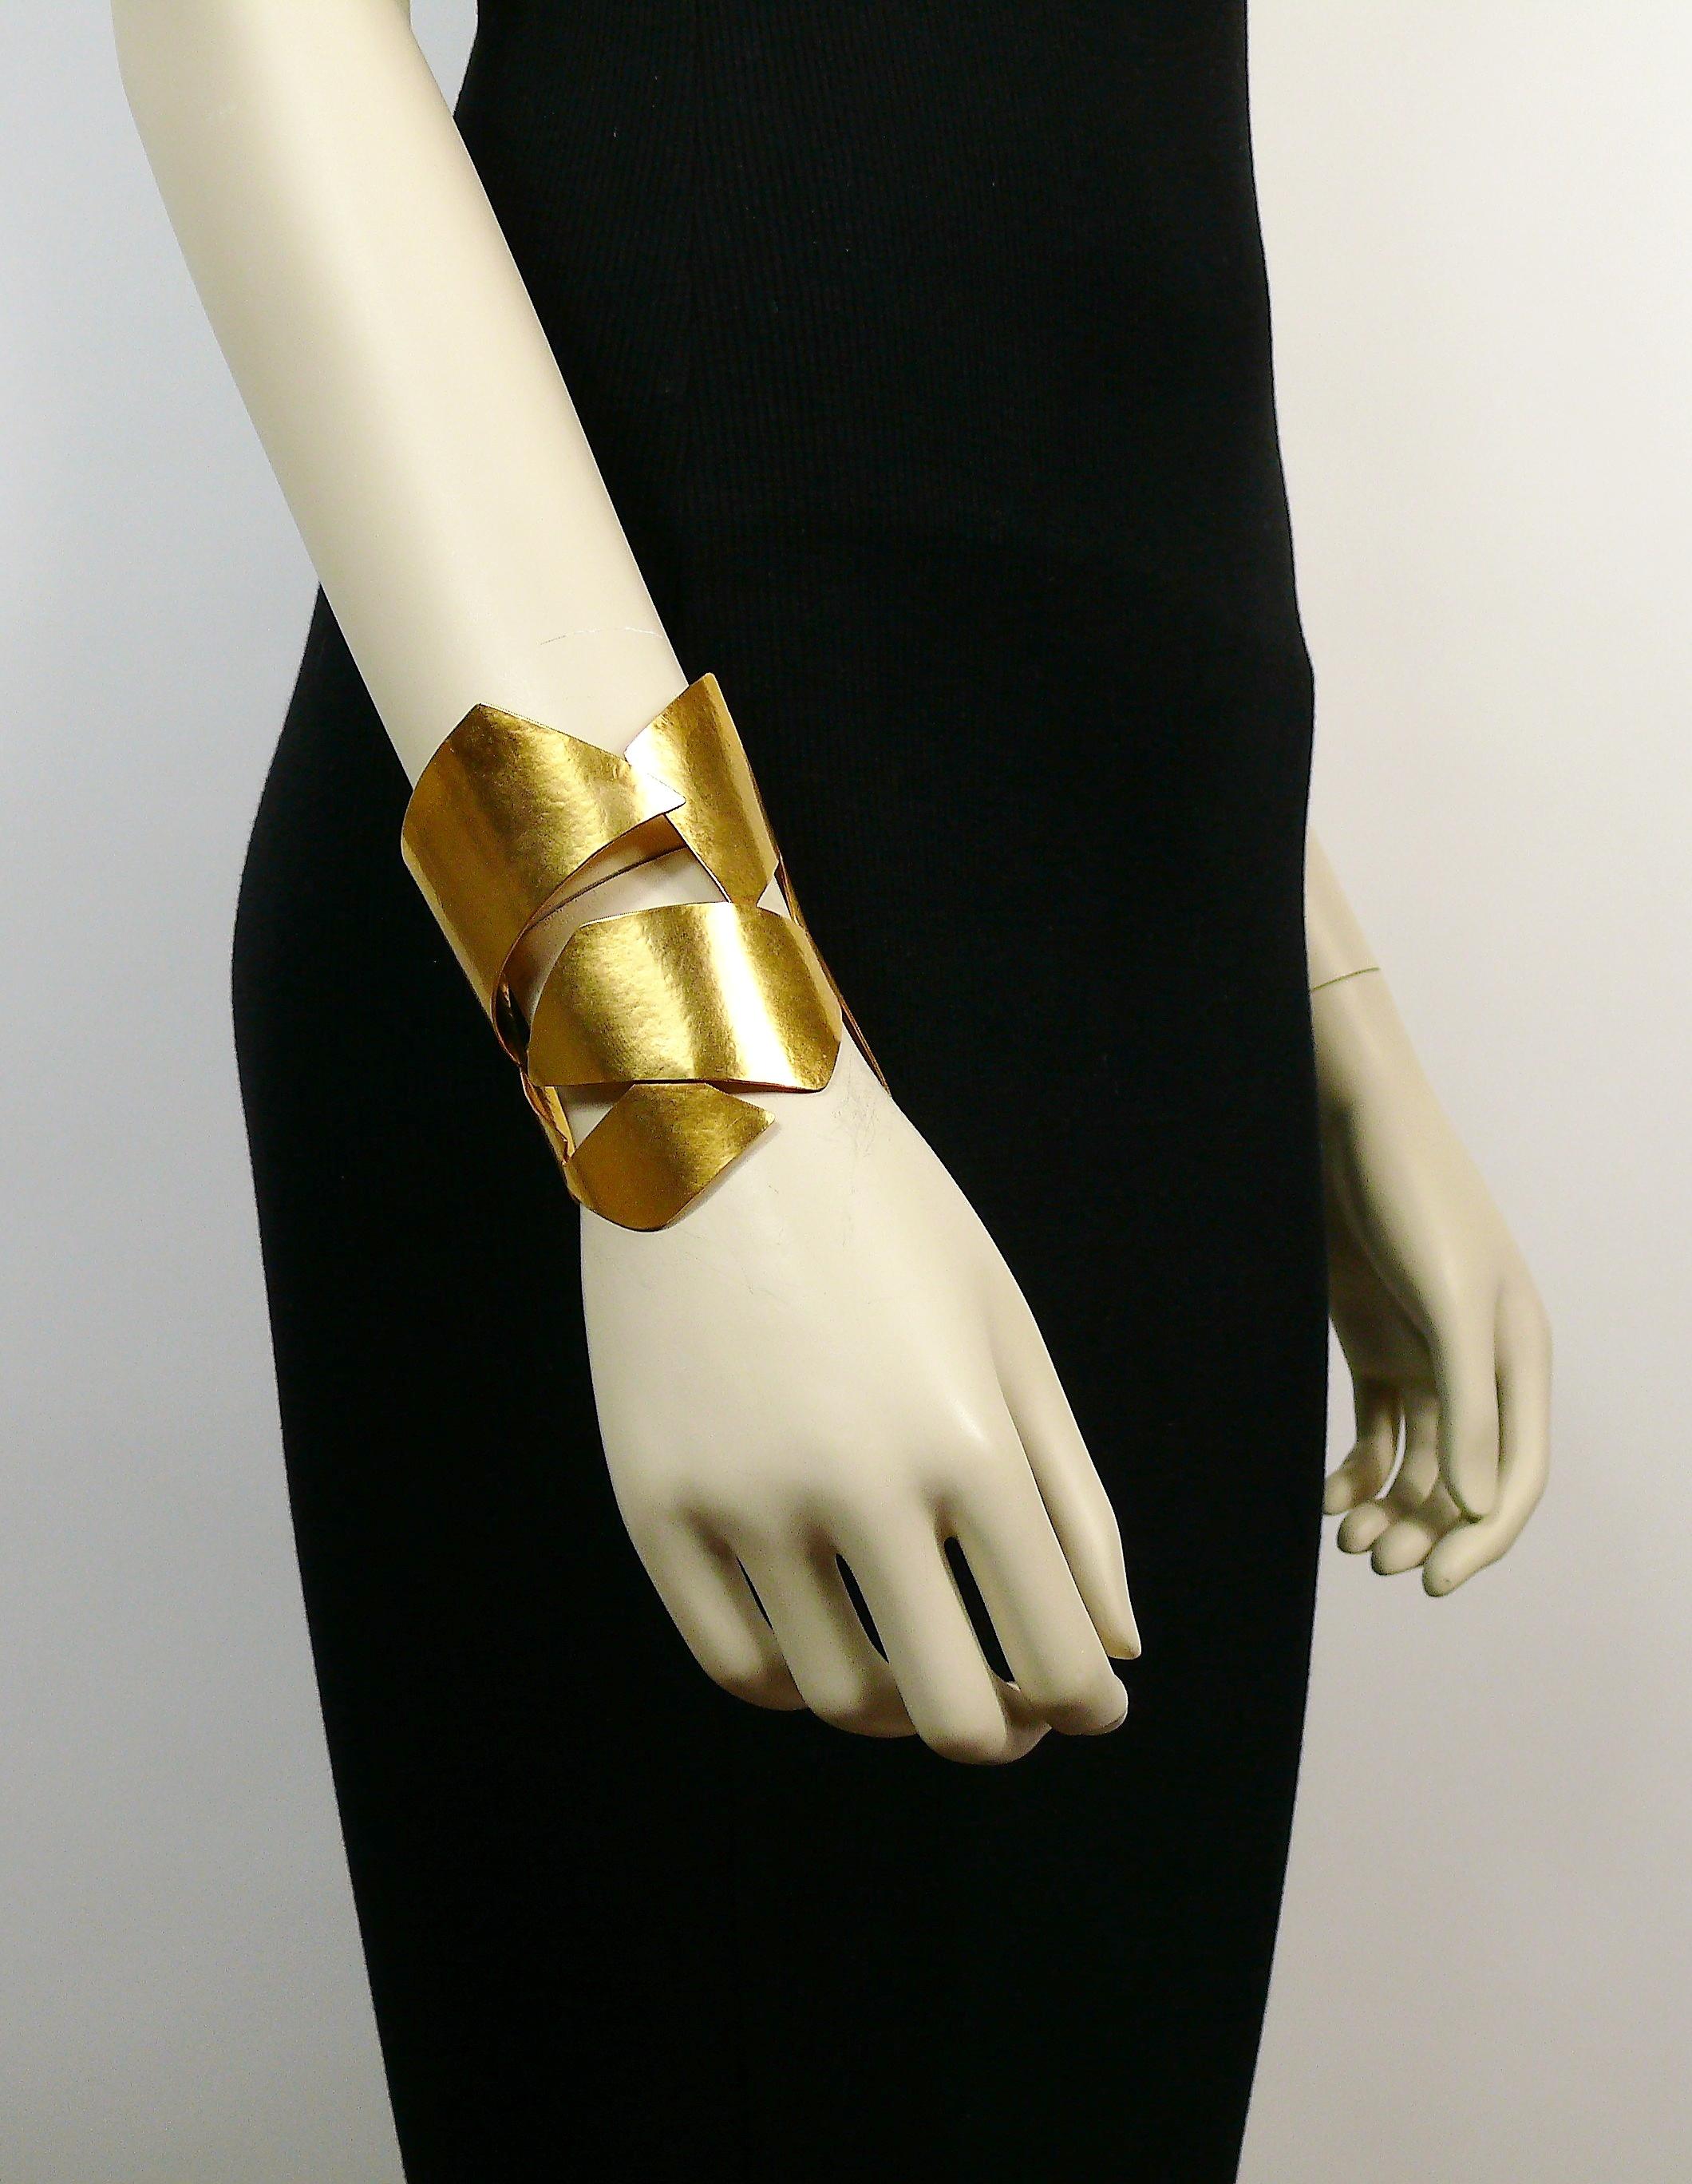 HERVE VAN DER STRAETEN vintage gold toned cuff bracelet featuring a cut-out design.

HERVE VAN DER STRAETEN monogram.

Indicative measurements : max. length approx. 9.3 cm (3.66 inches) / inner width from approx. 5.7 cm (2.24 inches) to approx. 6.1